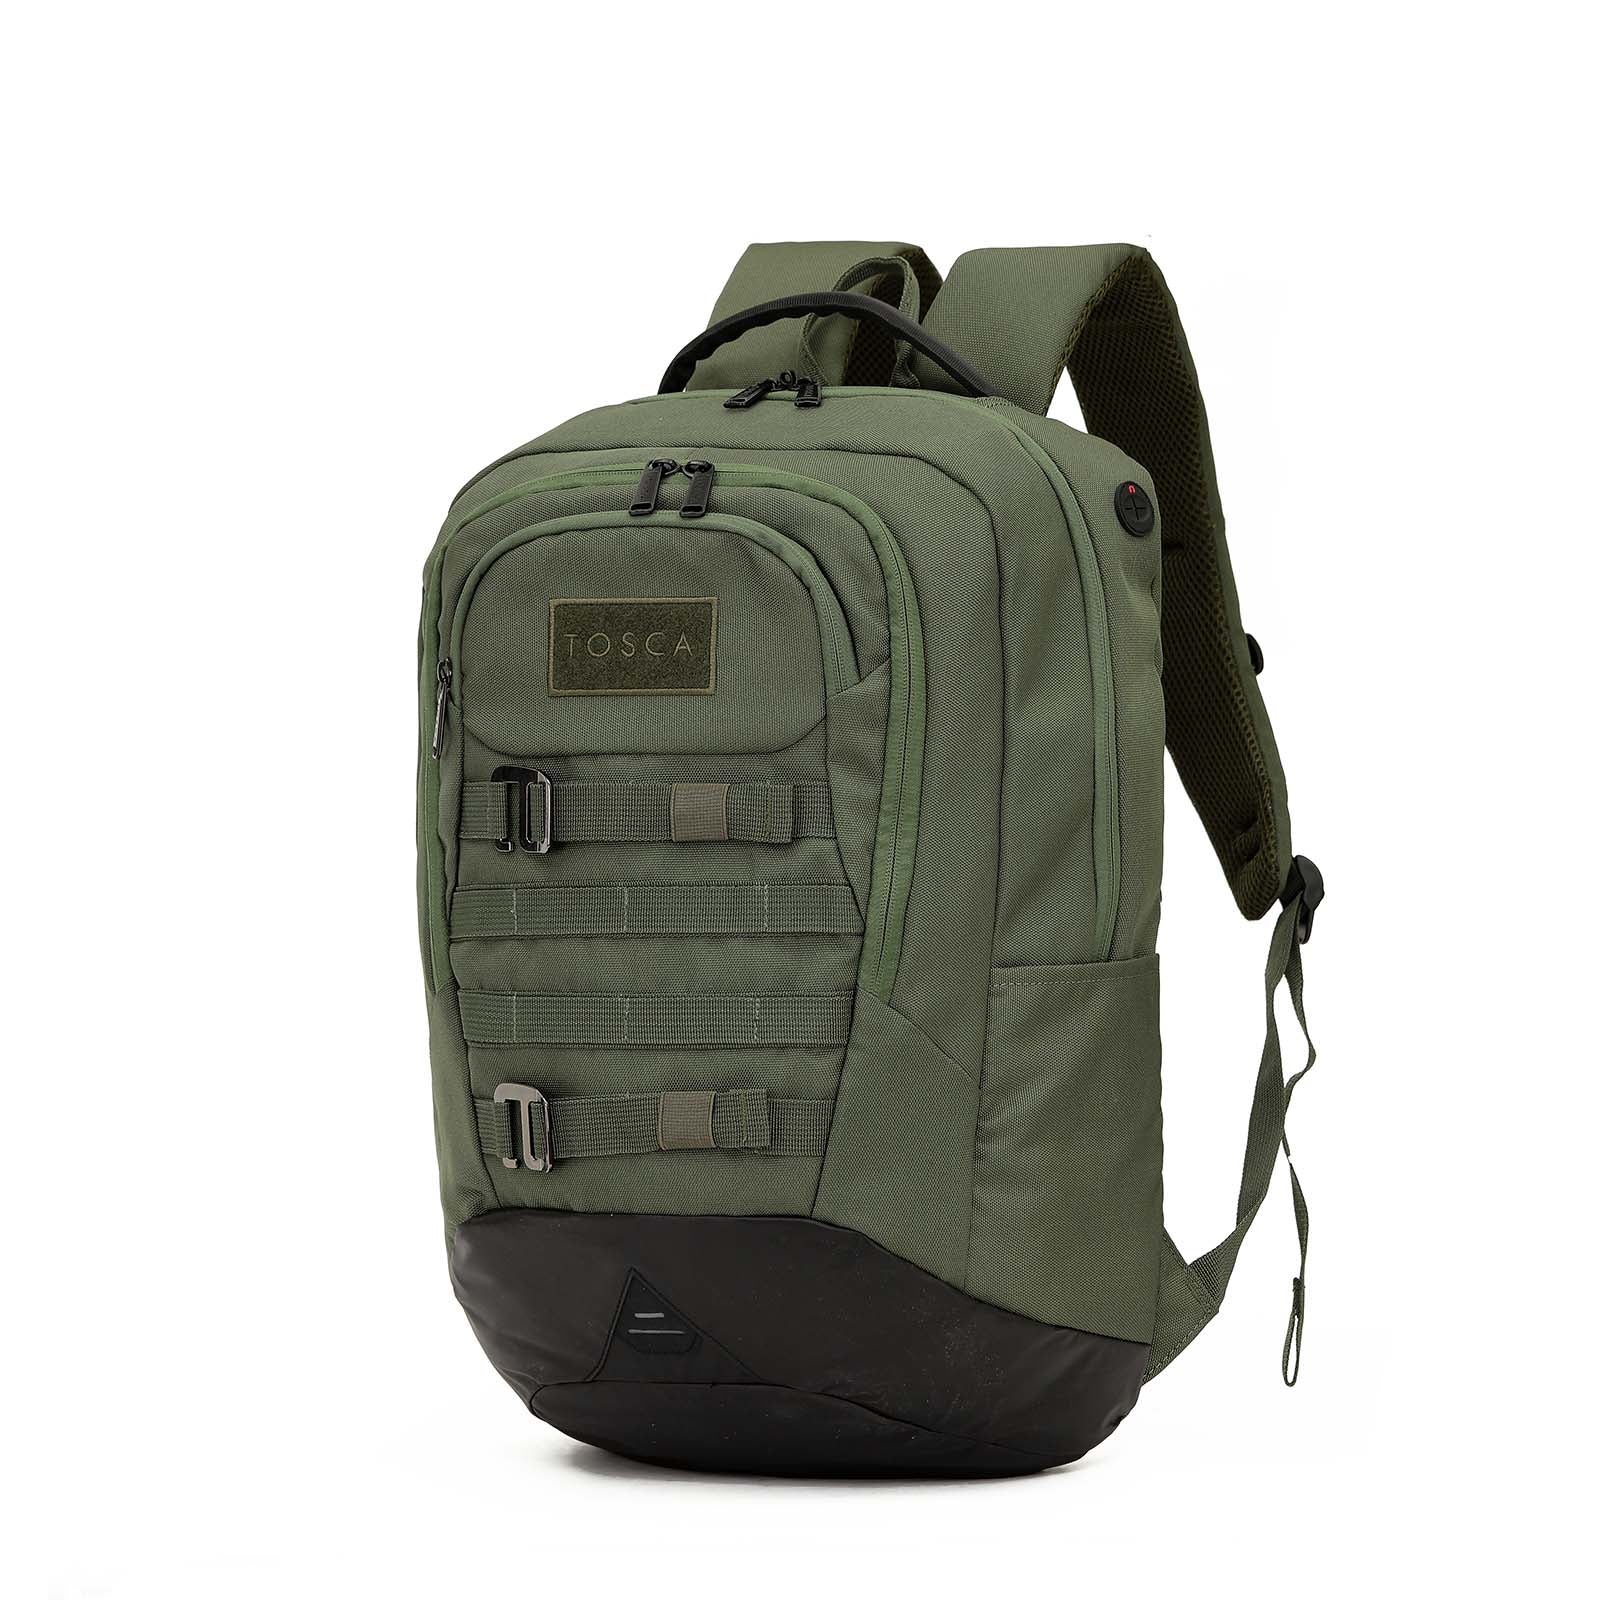 tosca-laptop-compartment-backpack-35l-khaki-front-angle